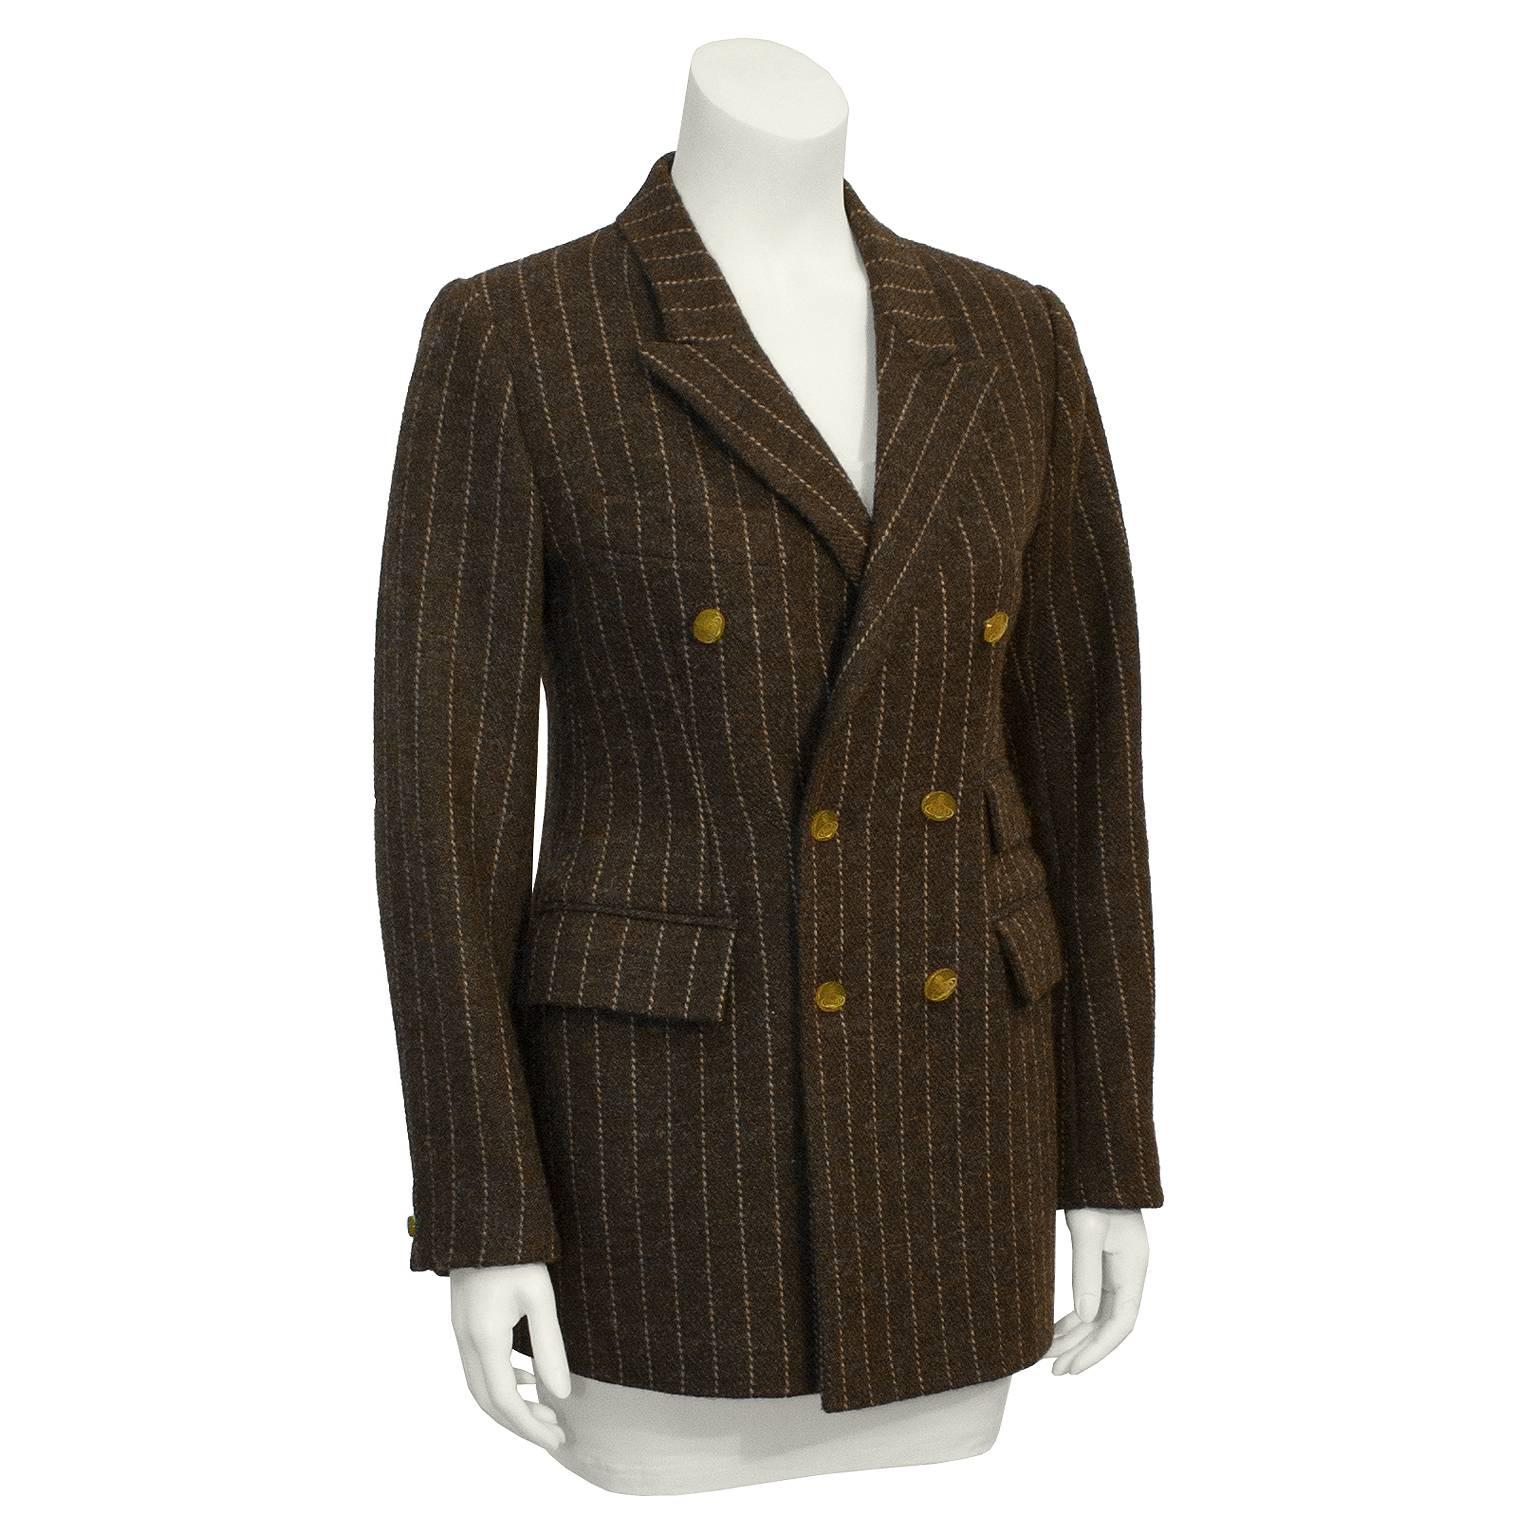 British punk designer Vivienne Westwood's wool blazer from the 1980's. Heavy weight brown wool, with beige pinstripes. Two flap pockets on right waist, one on the left waist and a slash breast pocket on the left. Double breasted, with mustard